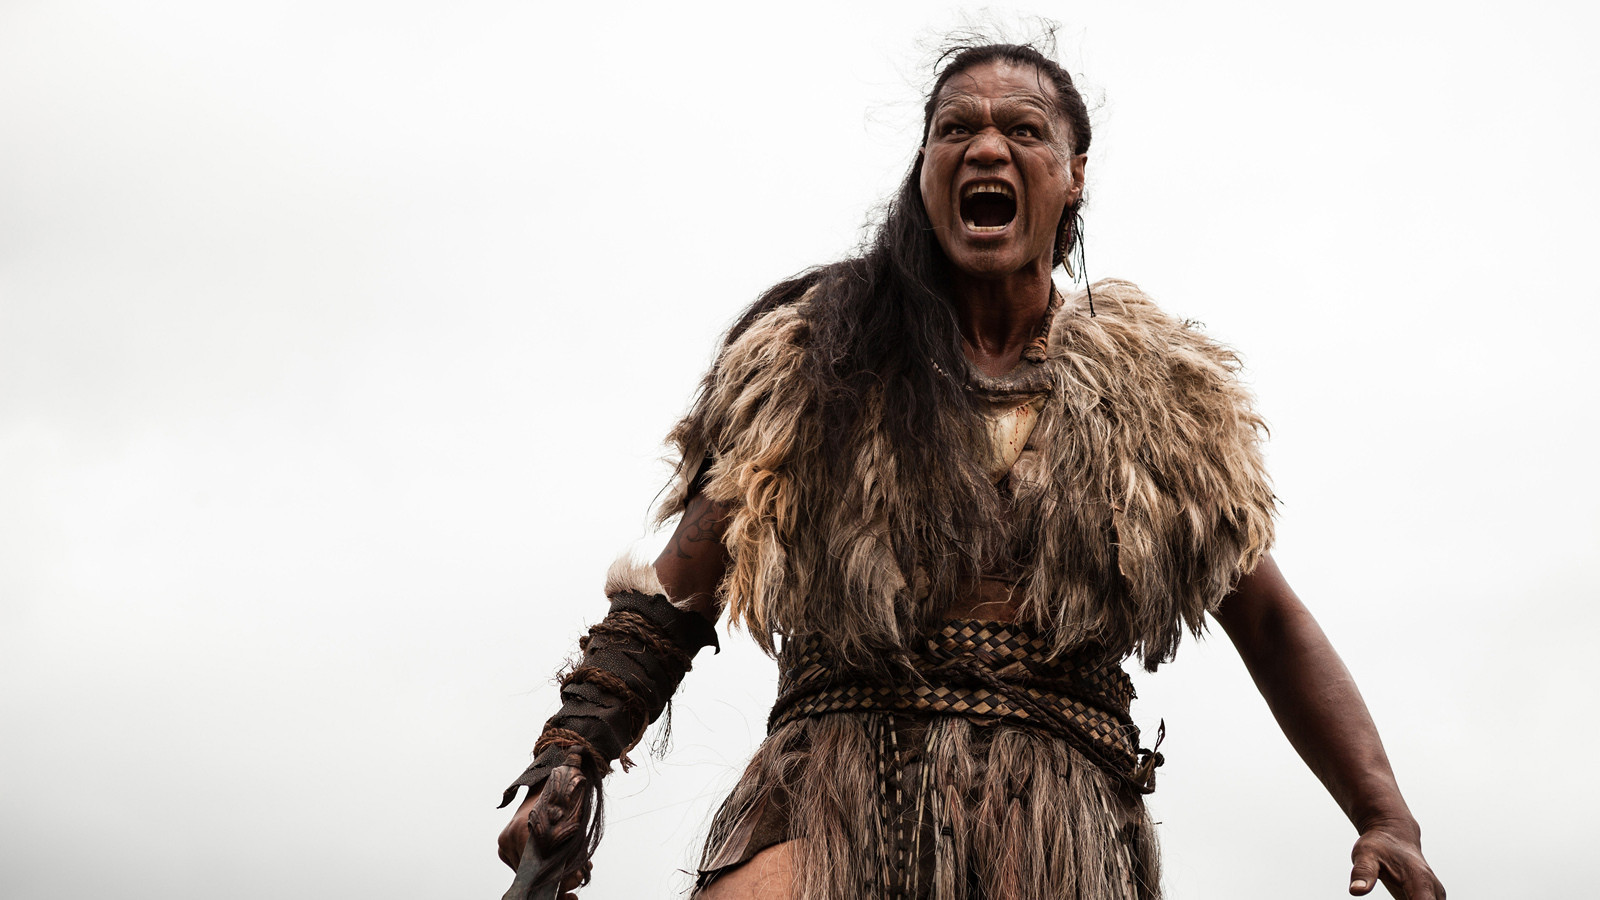 Review: Entertaining 'Dead Lands' skips over Maori realities - LA Times